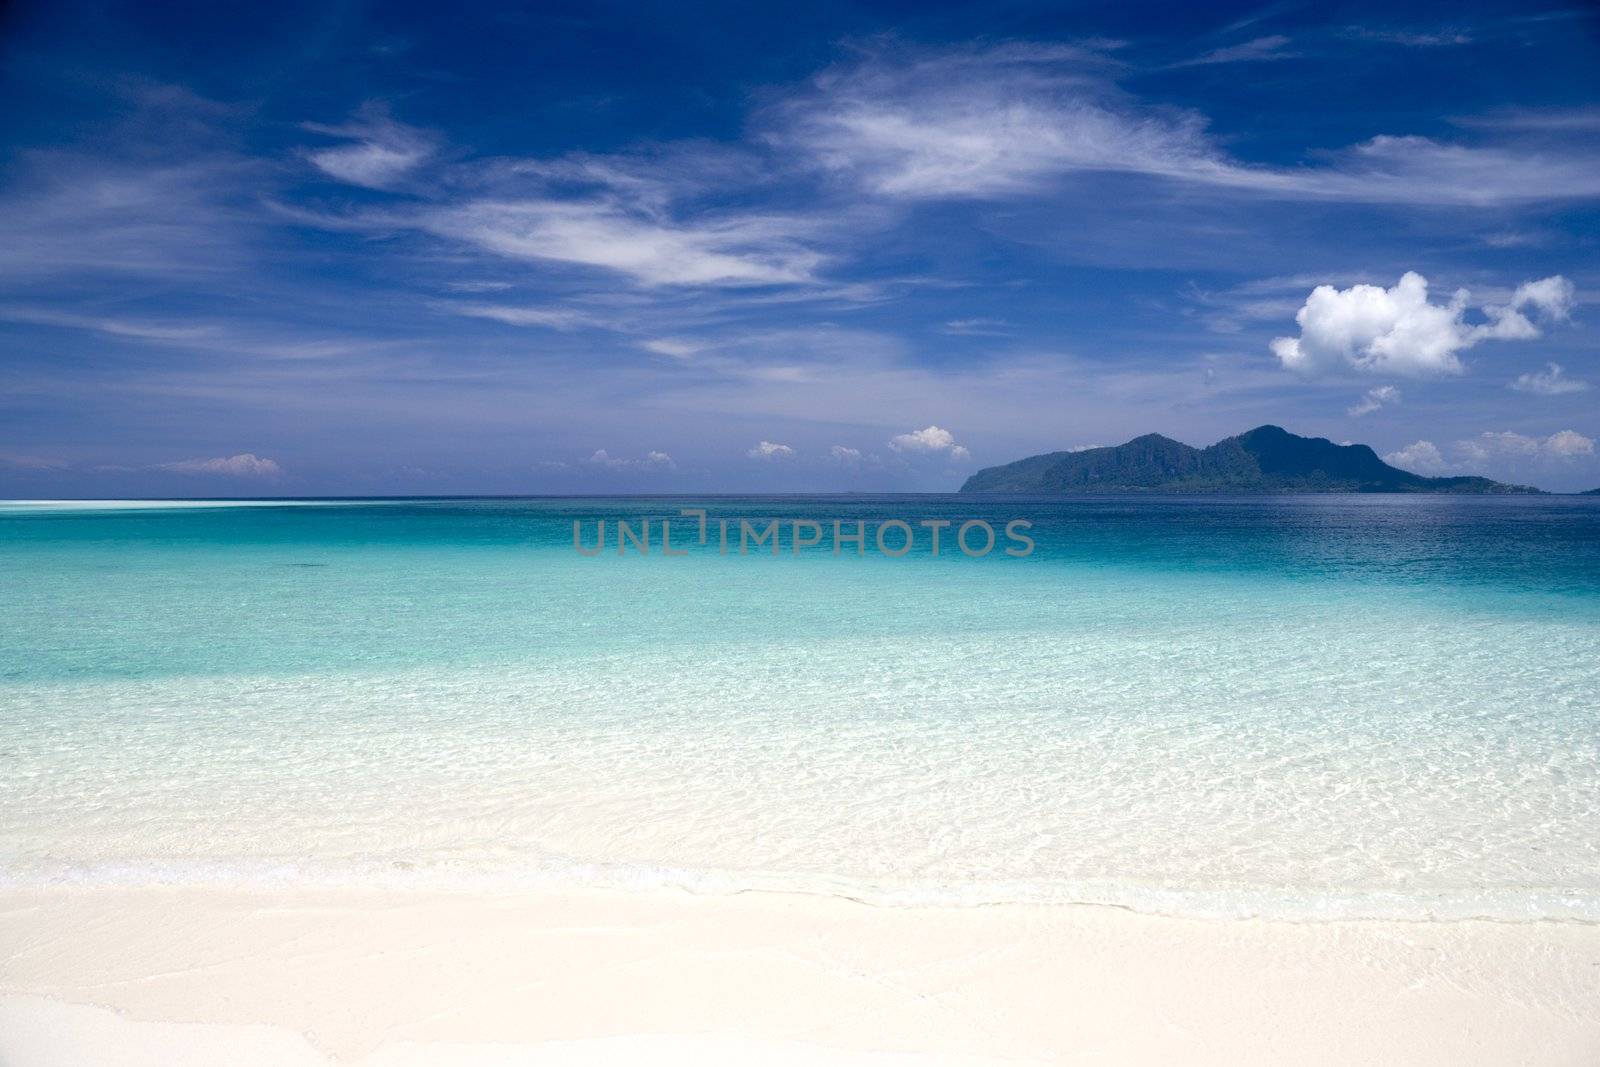 Image of a remote Malaysian tropical island beach with deep blue skies, crystal clear waters and an island in the background.